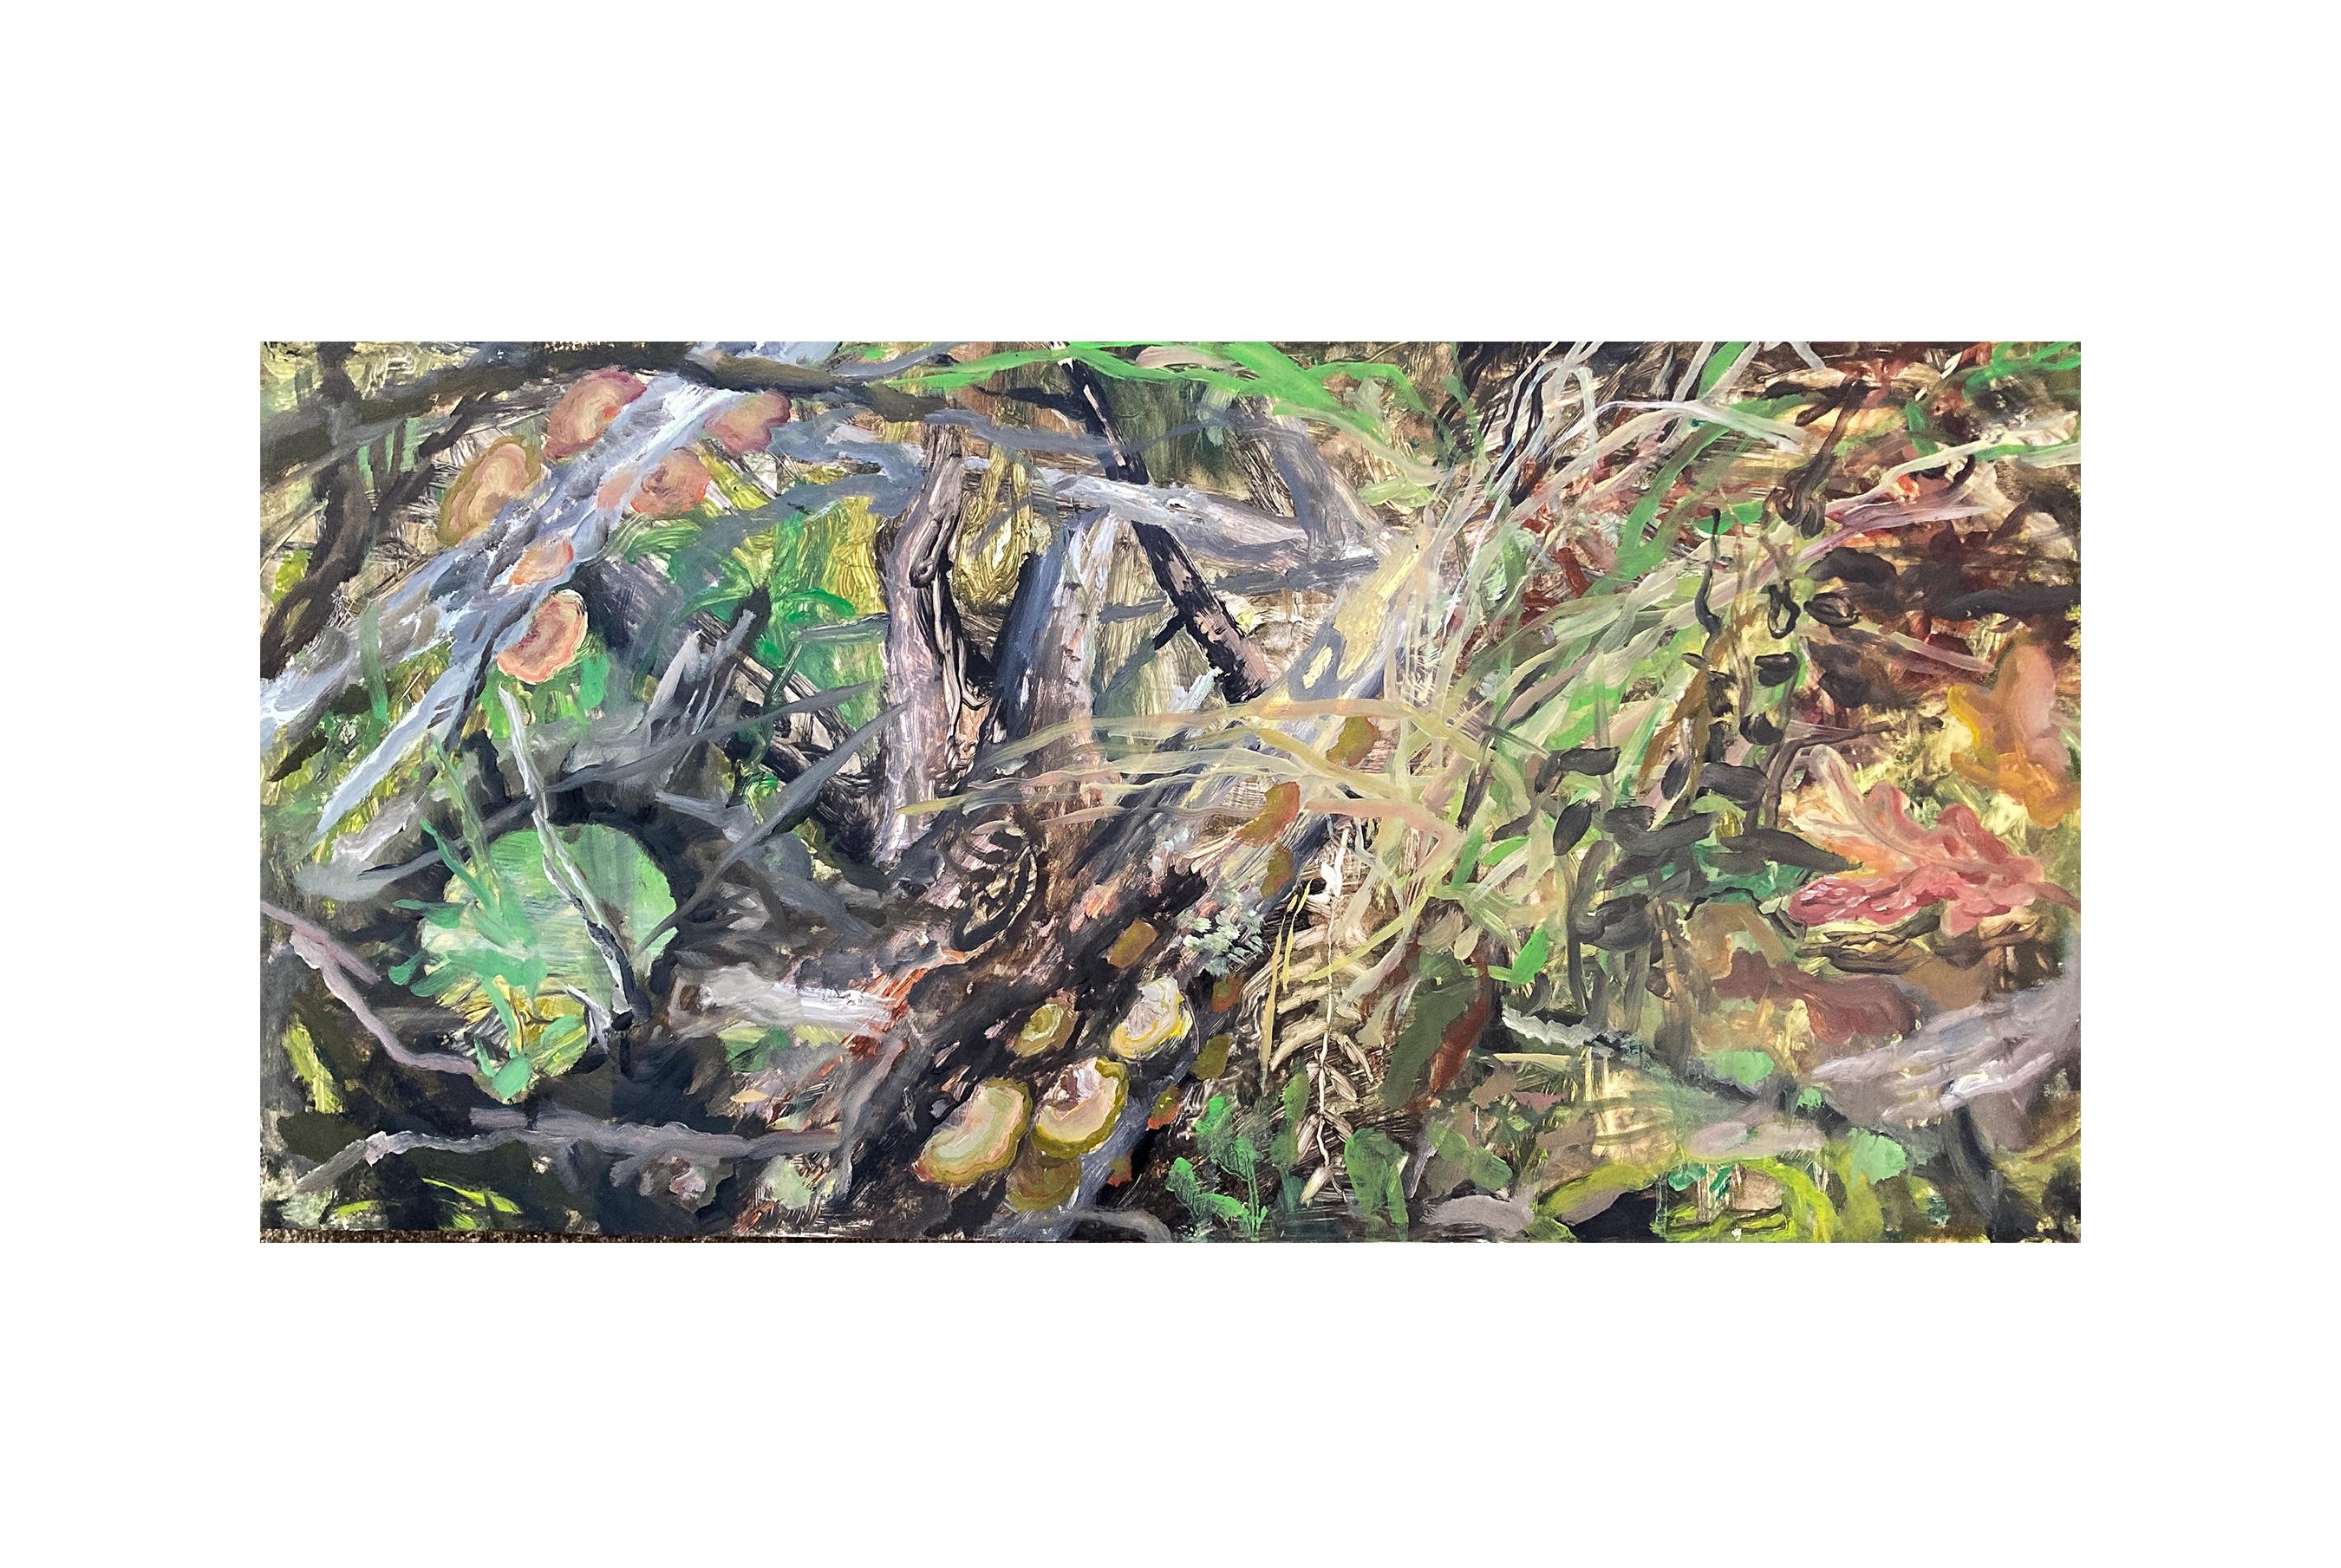 Liza Clement Figurative Painting - FOREST FLOOR INHABITANTS: OCTOBER - Oil on Yupo Panel Painting of Plant Life